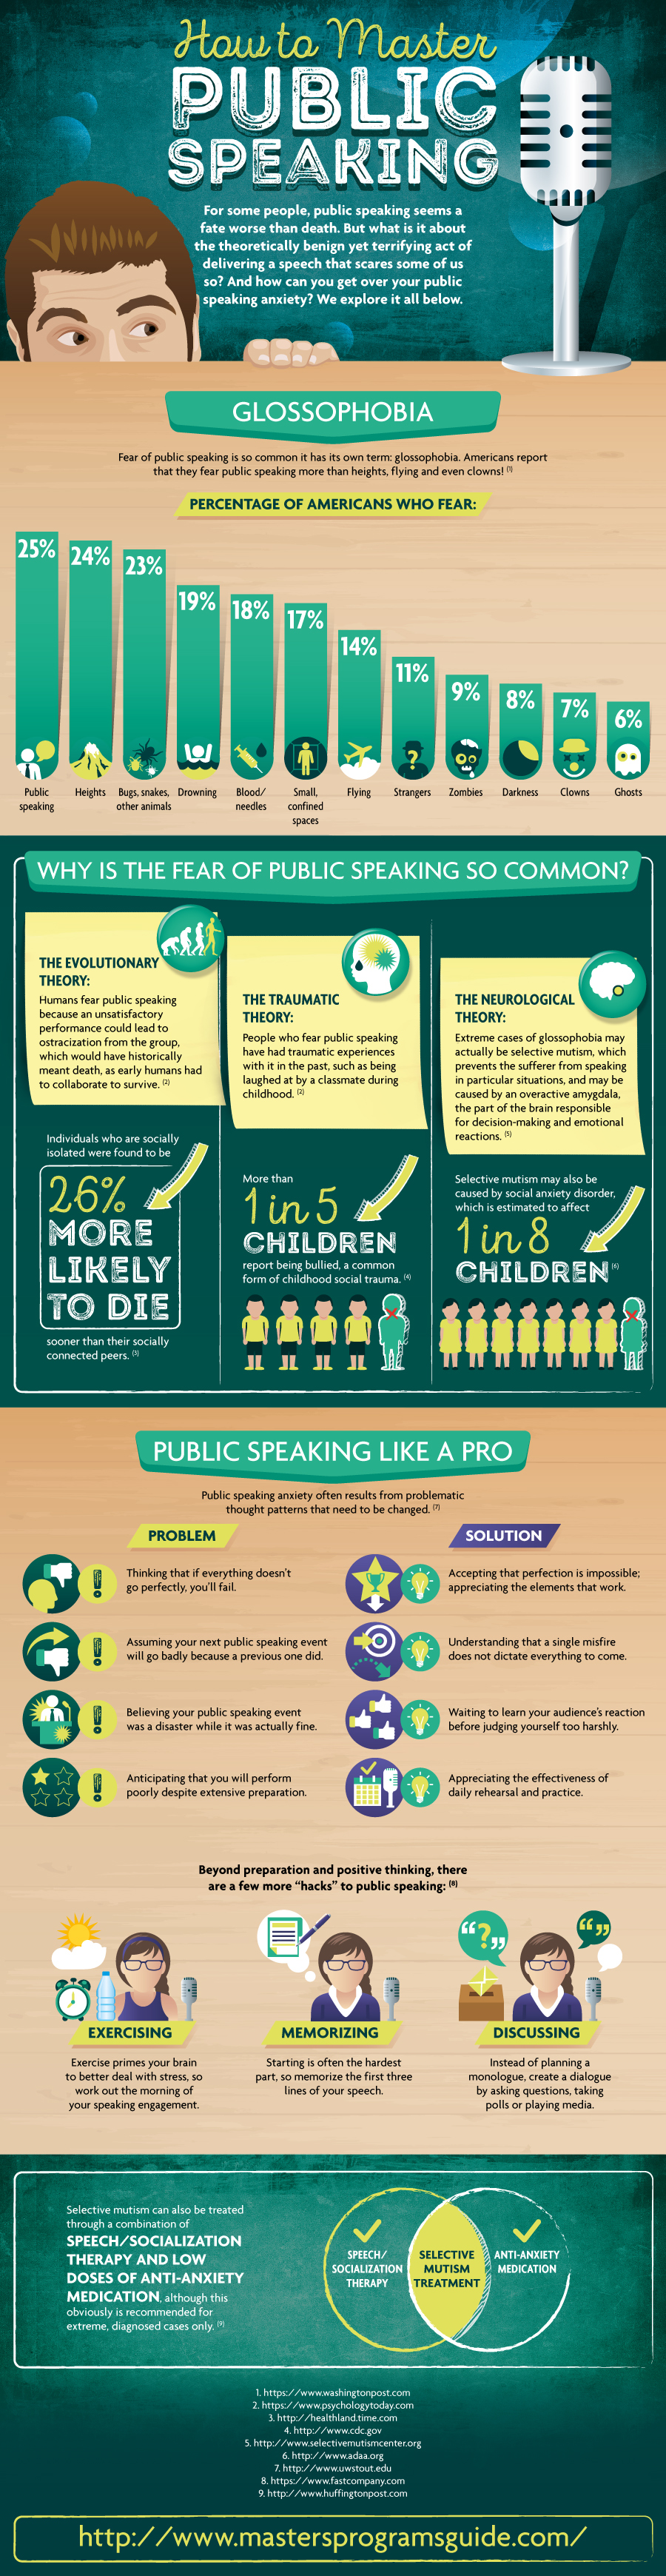 How to Master Public Speaking